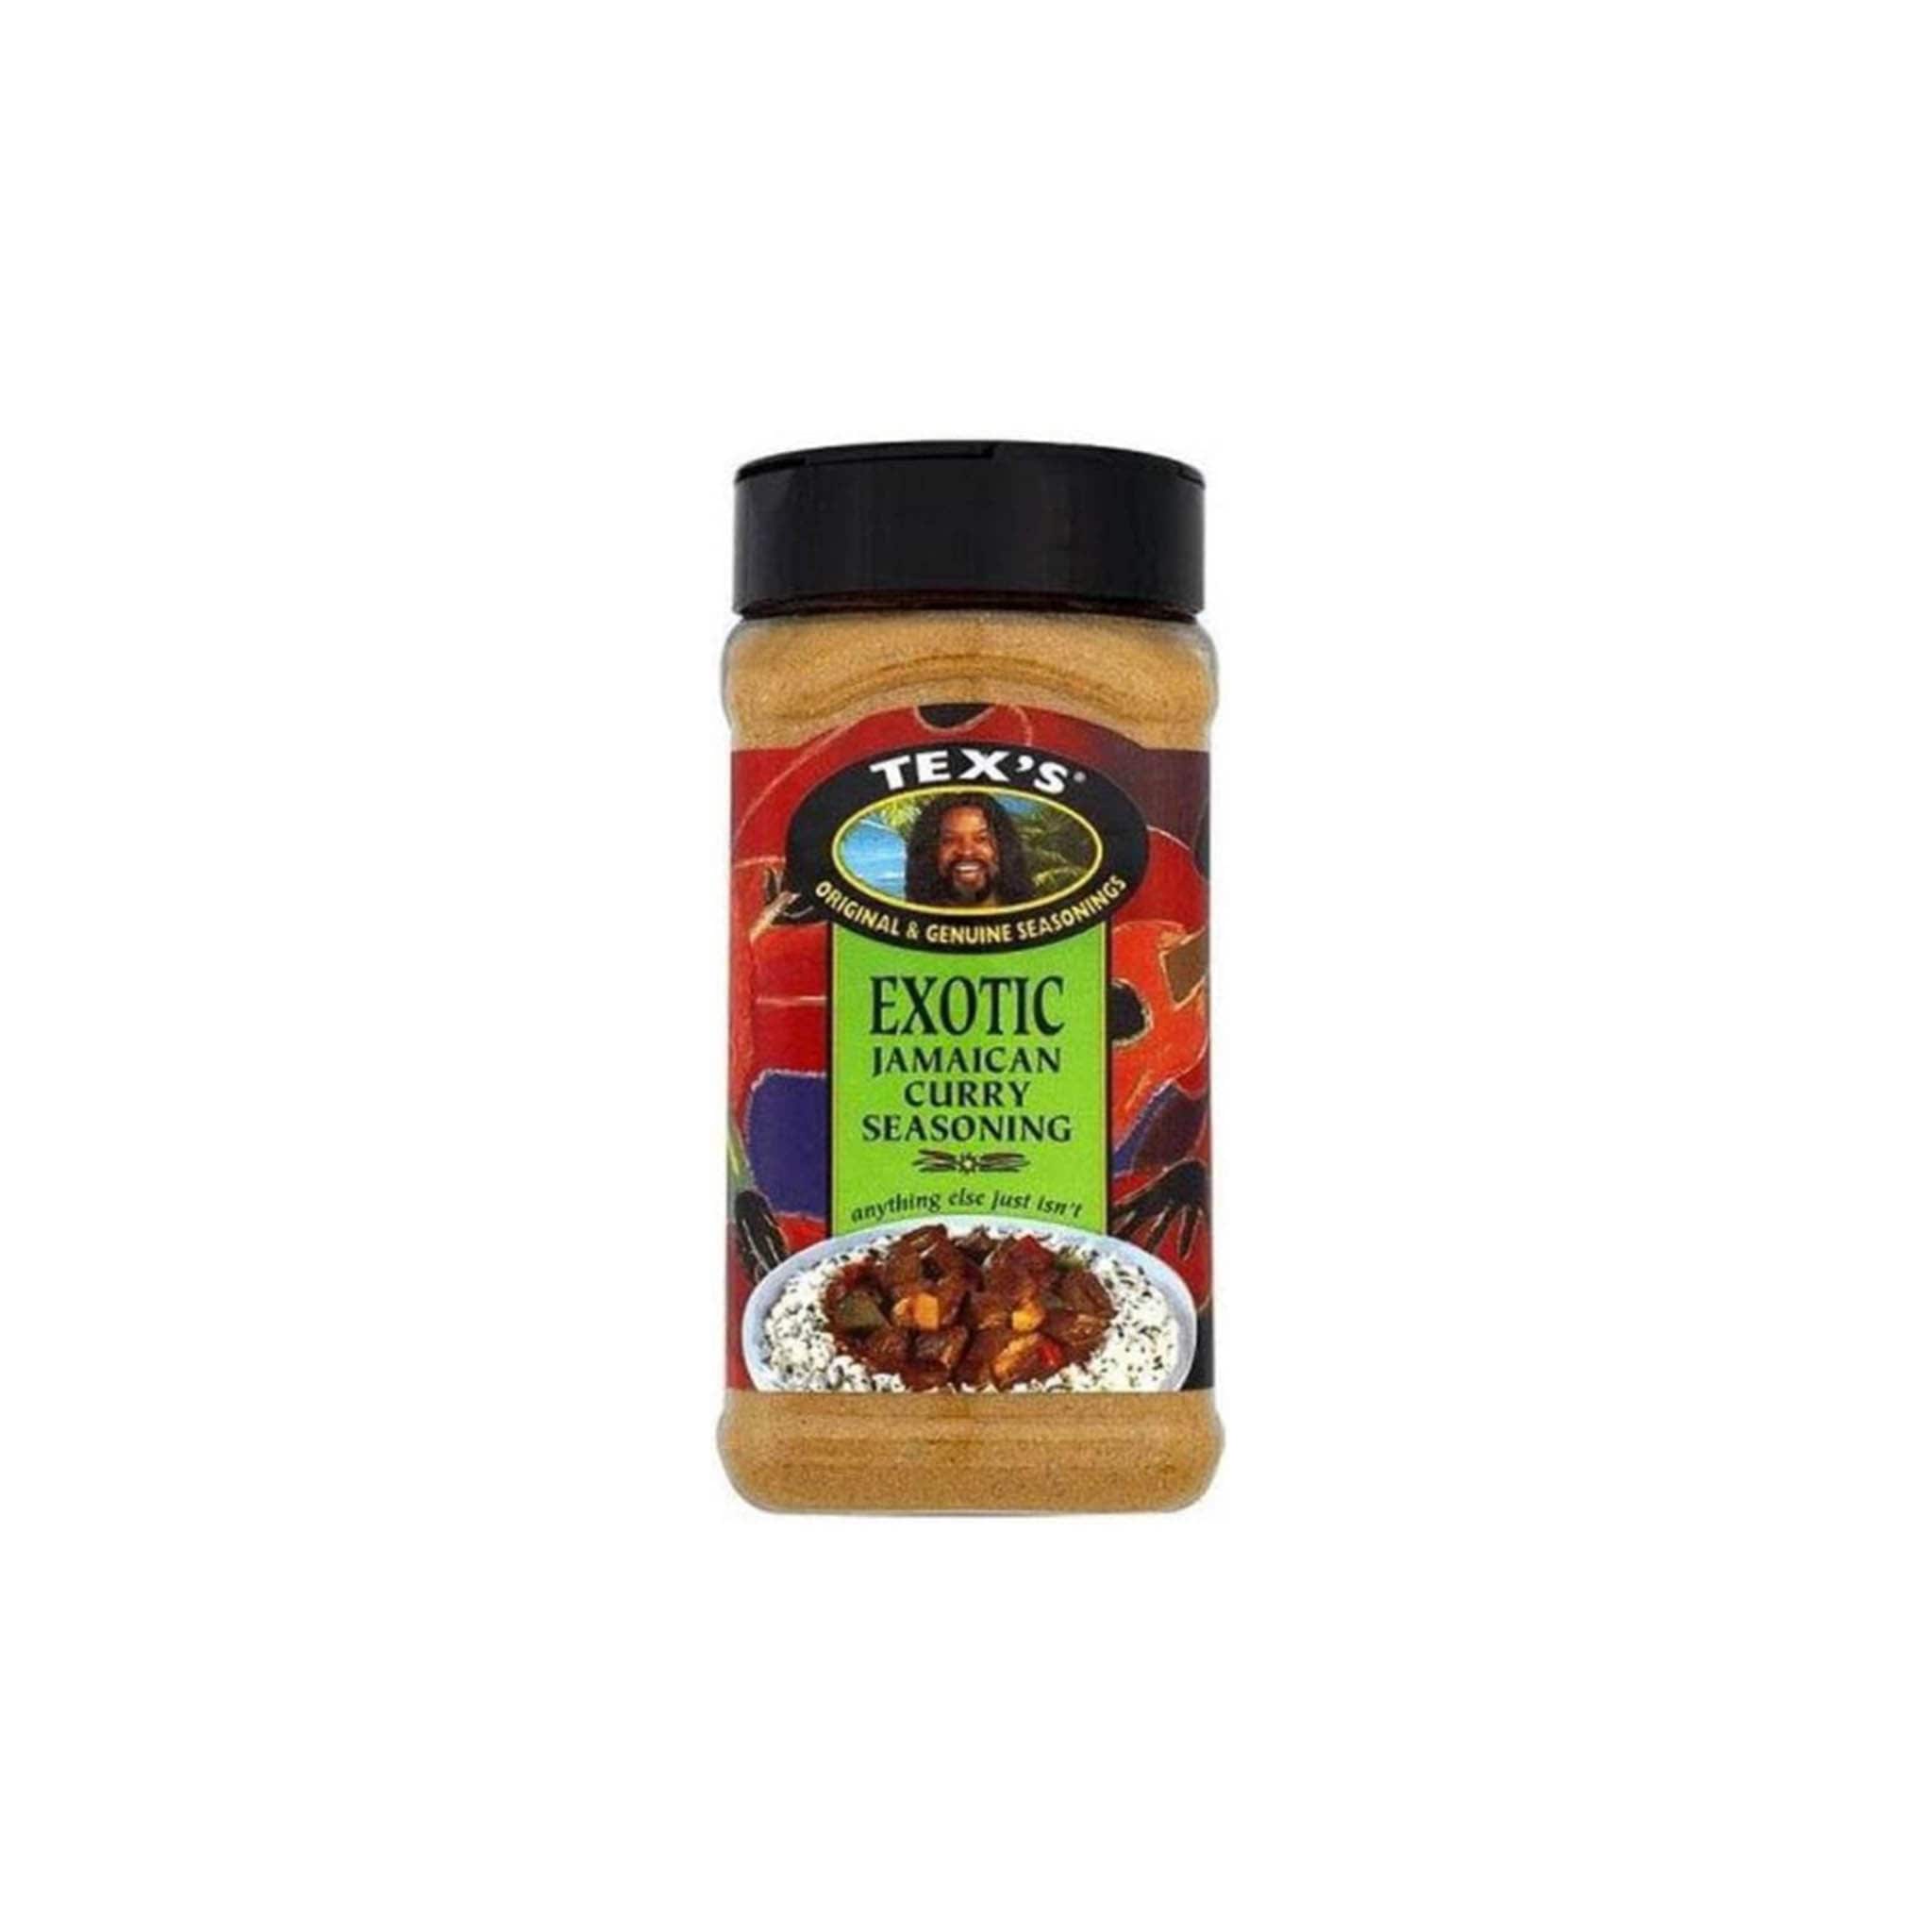 Texs Exotic Curry Seasoning, 300g